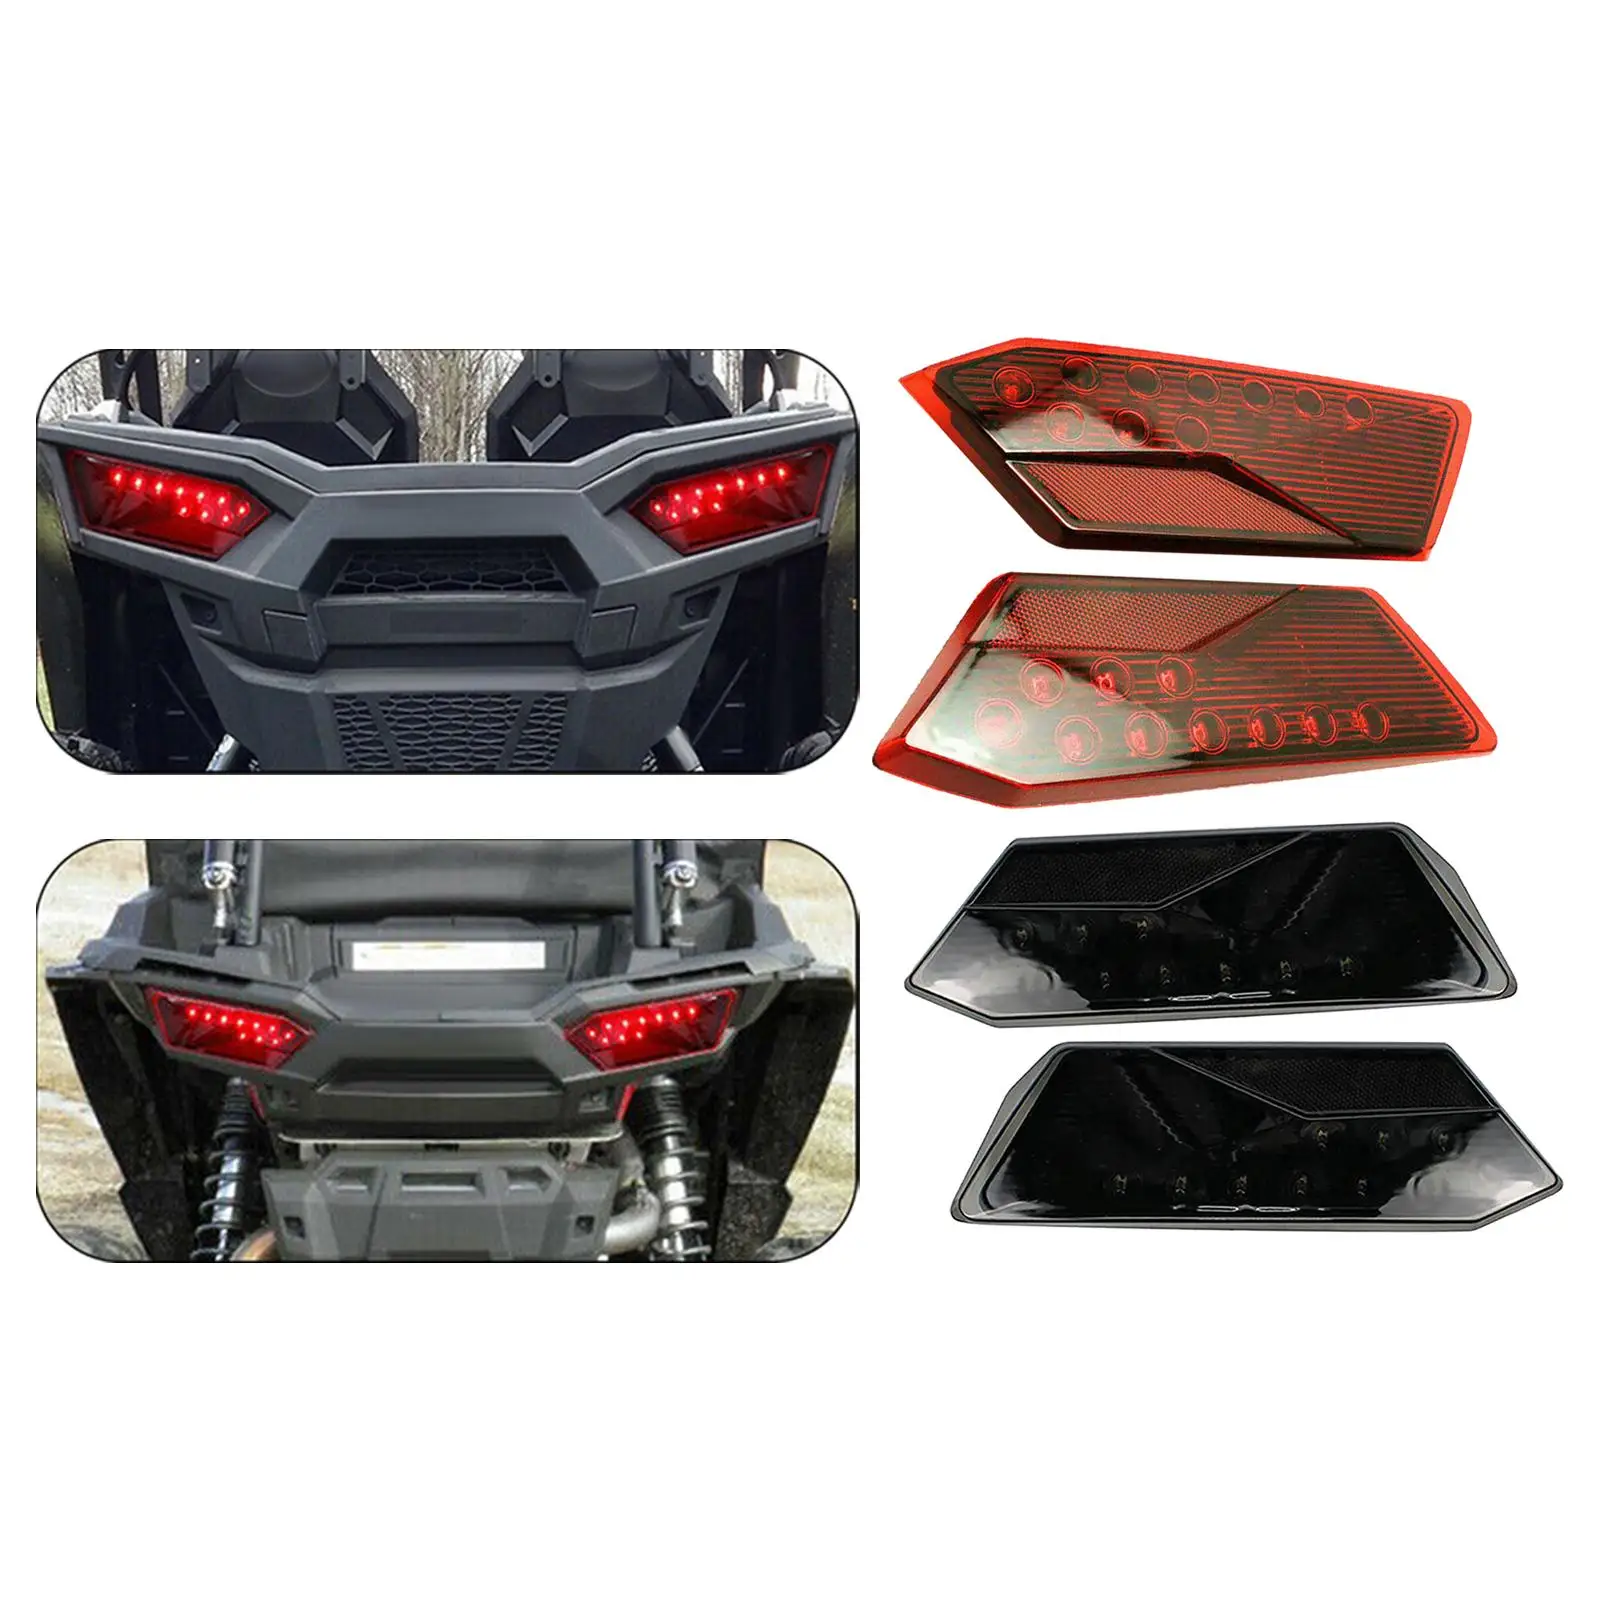 2x Tail Lights Accessories Fit for RZR 2014-2019 2412341 2412342